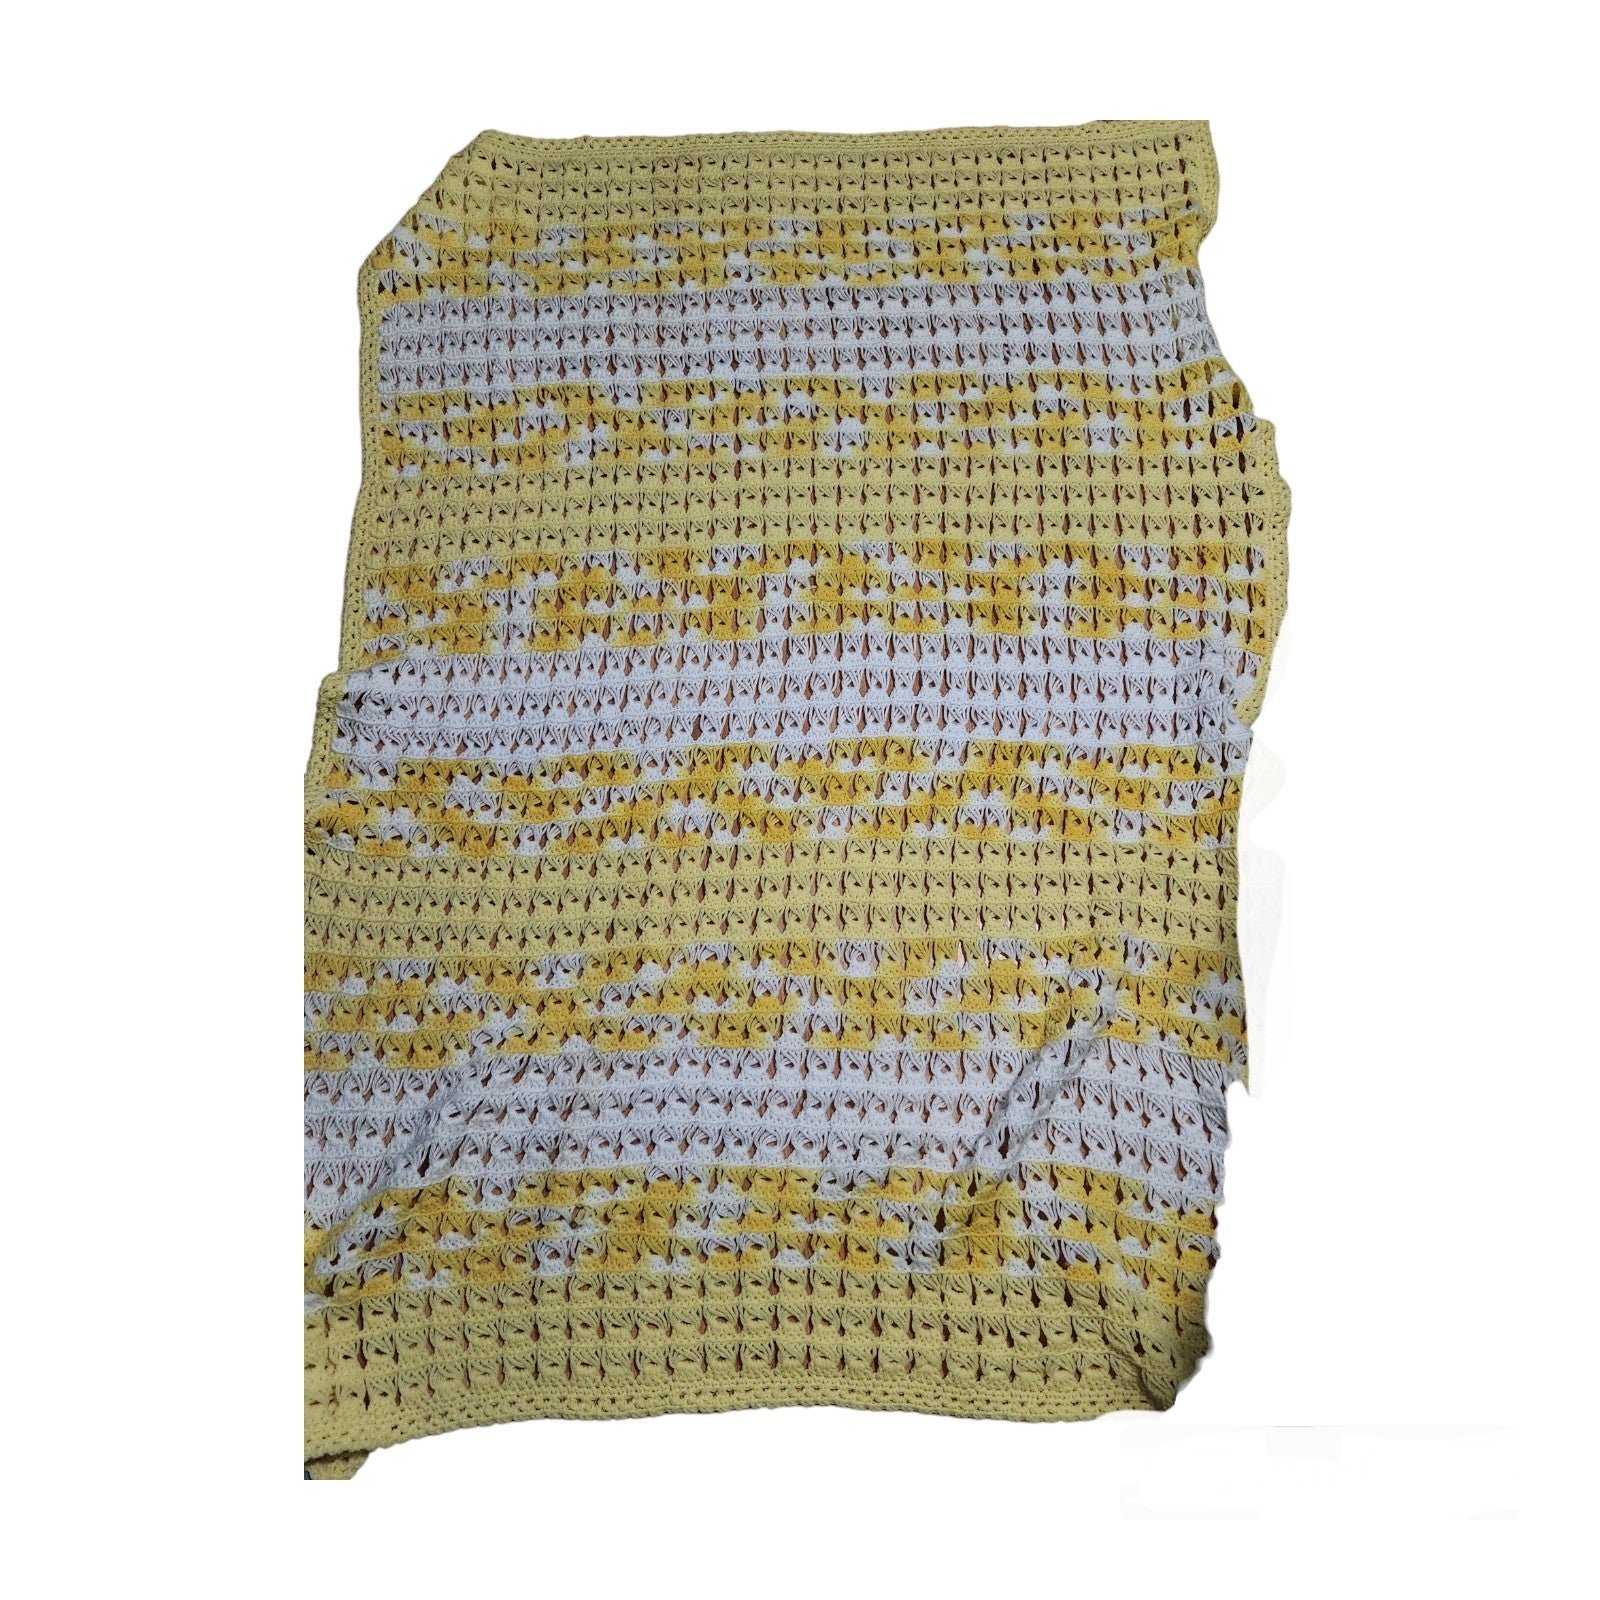 Vintage Hand Crafted Crocheted Afghan Blanket ThrowIn soft colors yellow & white kcwXFS2zE